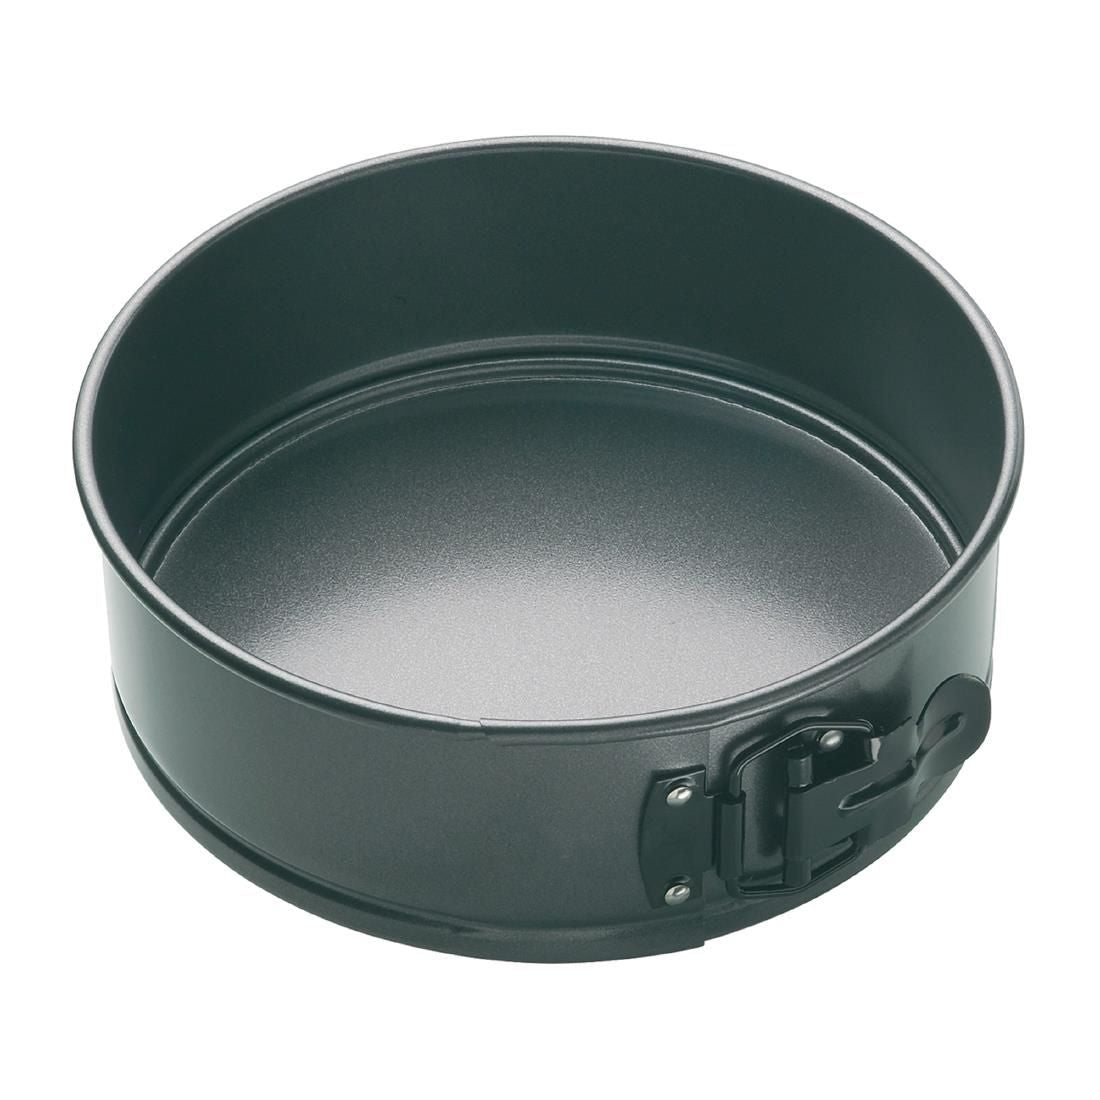 FC353 Masterclass Non-Stick Spring Form Round Cake Tin 200mm JD Catering Equipment Solutions Ltd